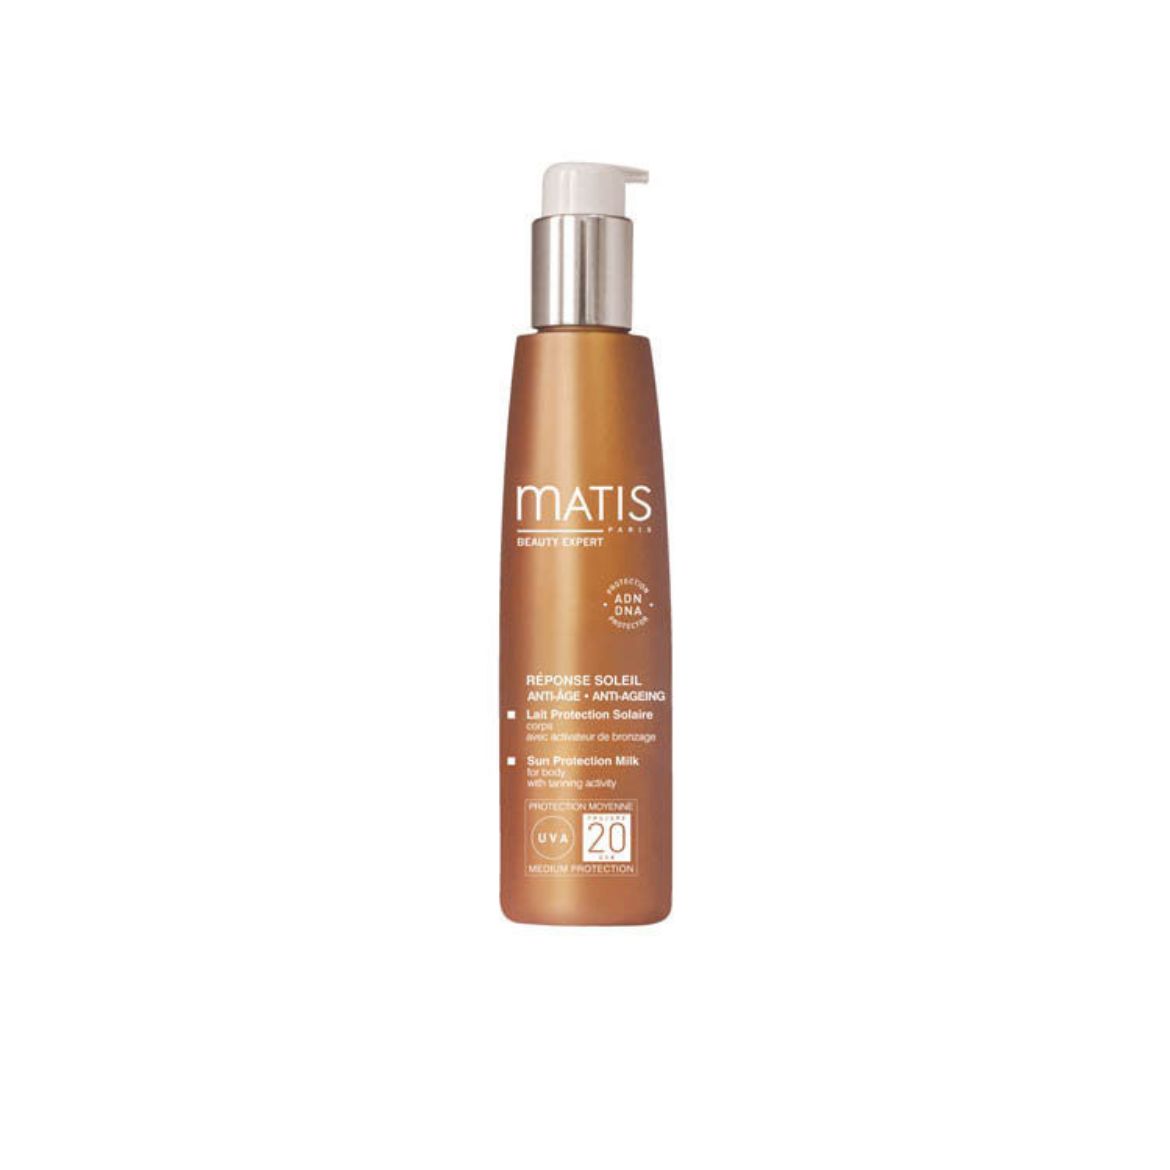 Image of Matis Lait protection FPS 20 (150ml)